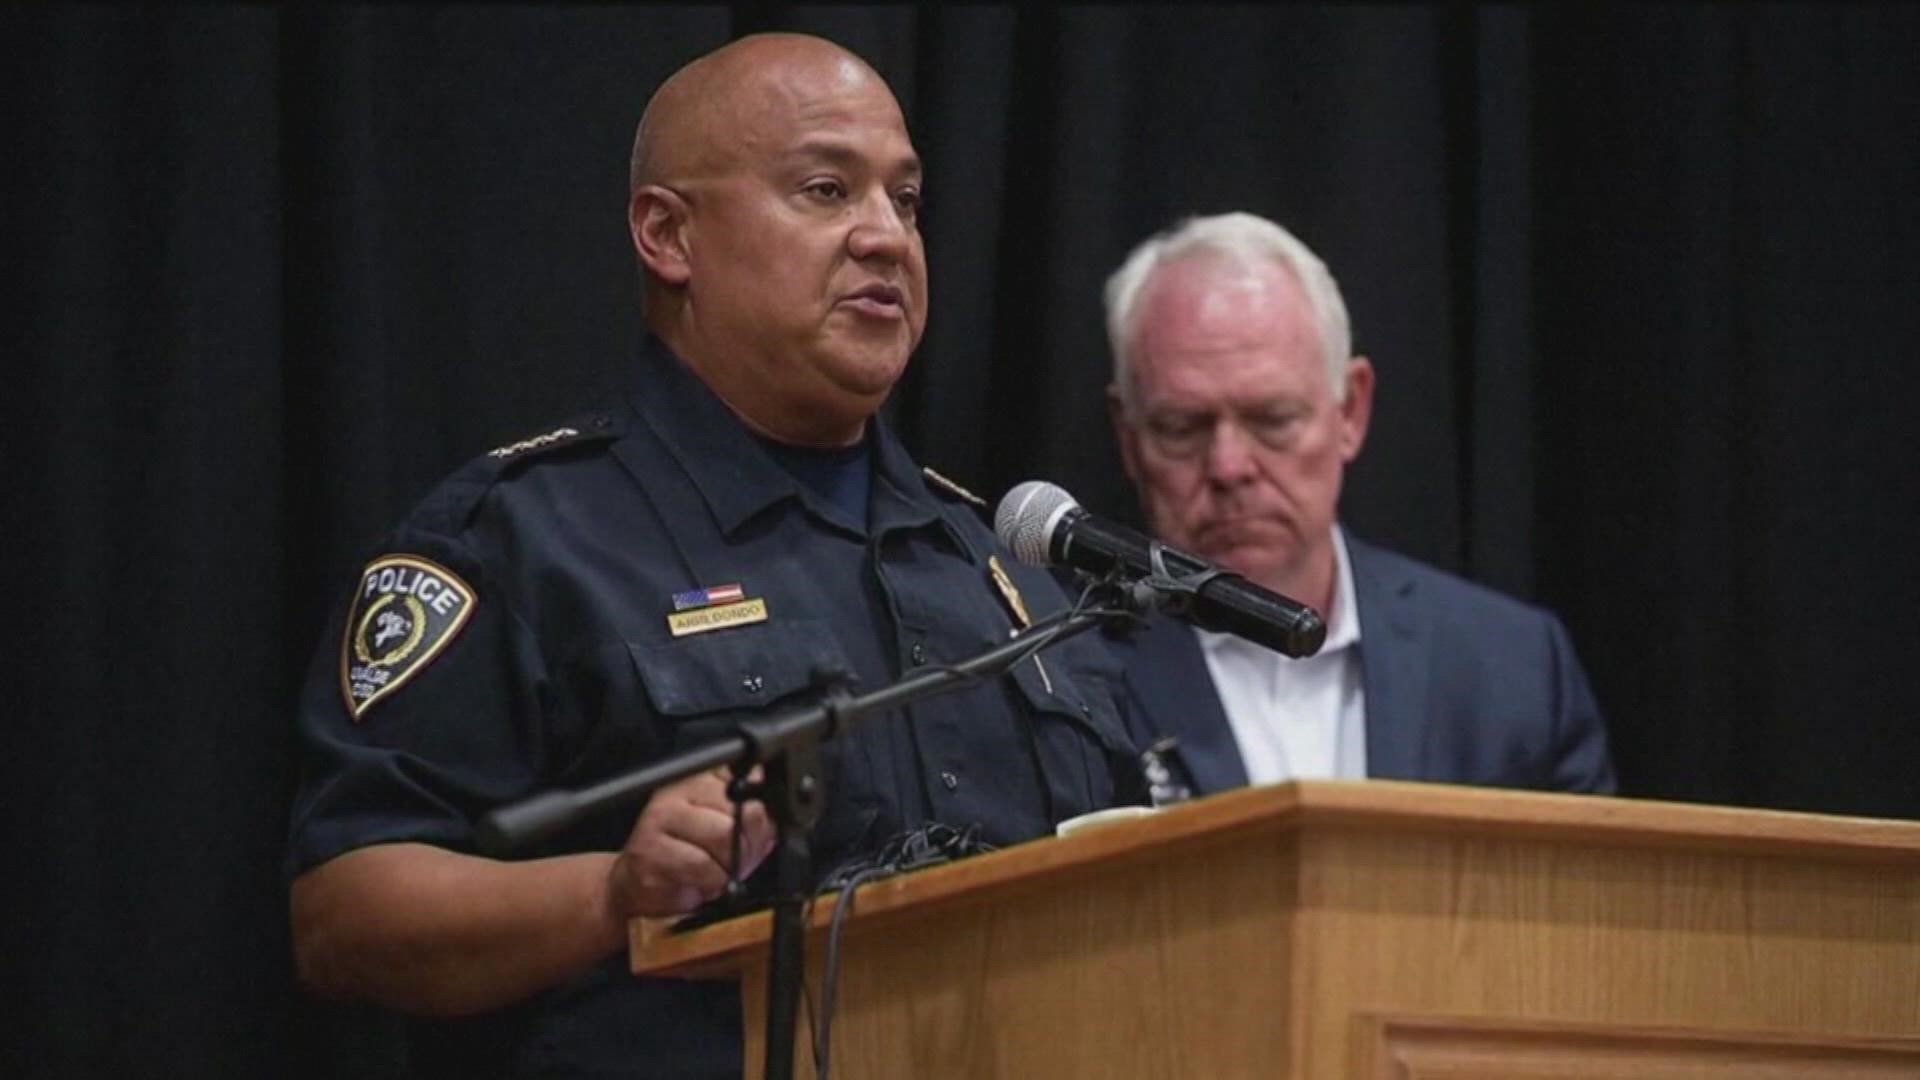 Exactly three months after 19 students and two teachers were killed, the Uvalde CISD has fired embattled police chief Pete Arredondo.